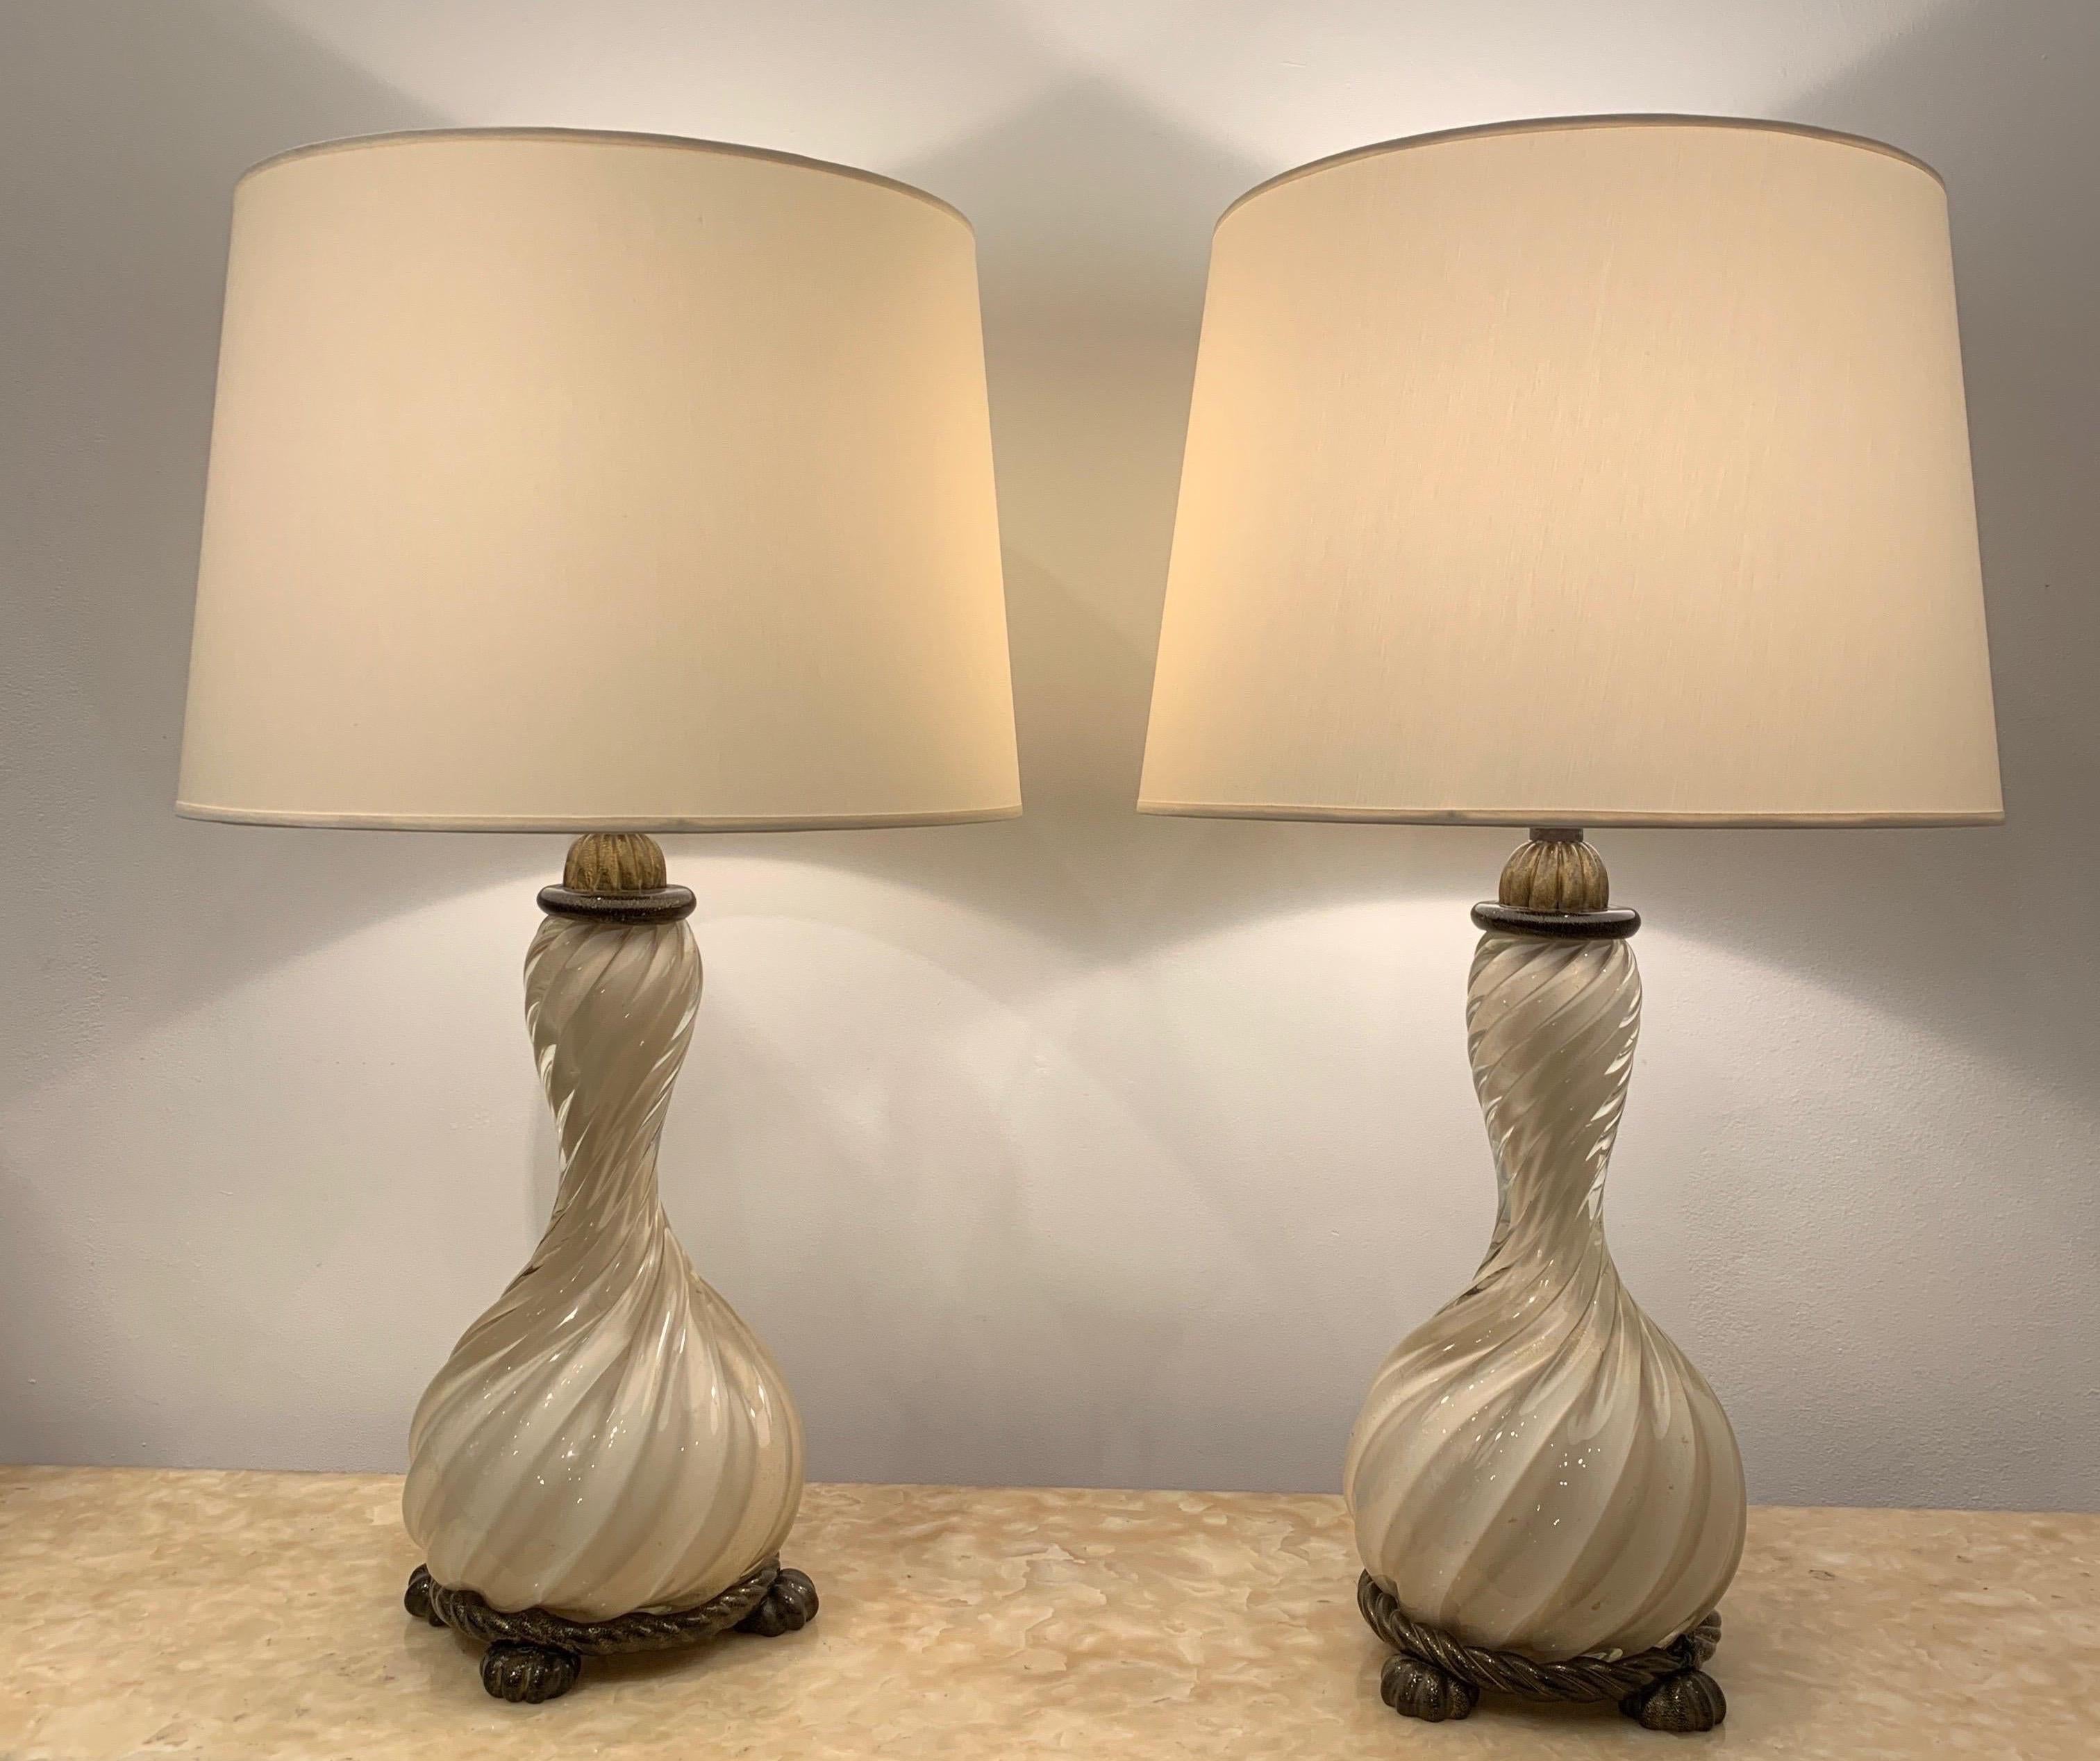 The pair of lamps dates from the 1940s. It has a magnificent Baroque twist. The Cristal glass is white colored with gold sprinkles. Black feet and the top are similarly decorated with gold sprinkles.
Barovier is a reputable Murano Glassmaker. His